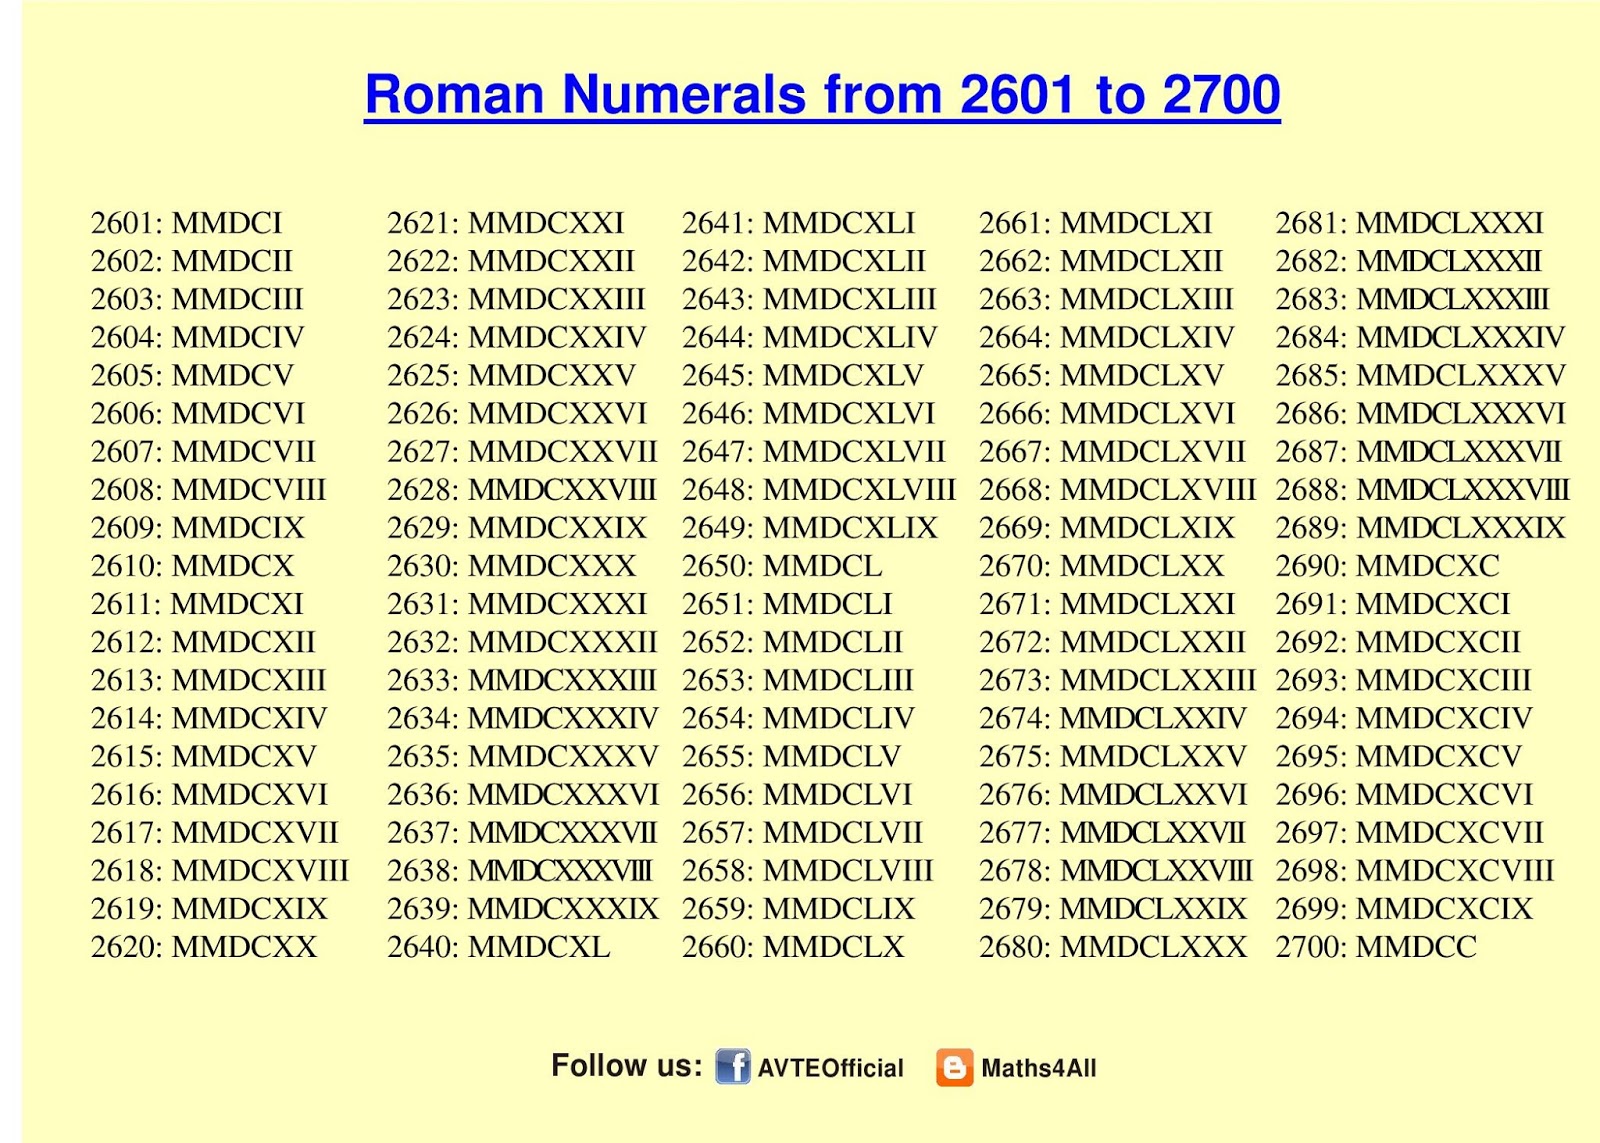 Maths4all: ROMAN NUMERALS 2601 TO 2700